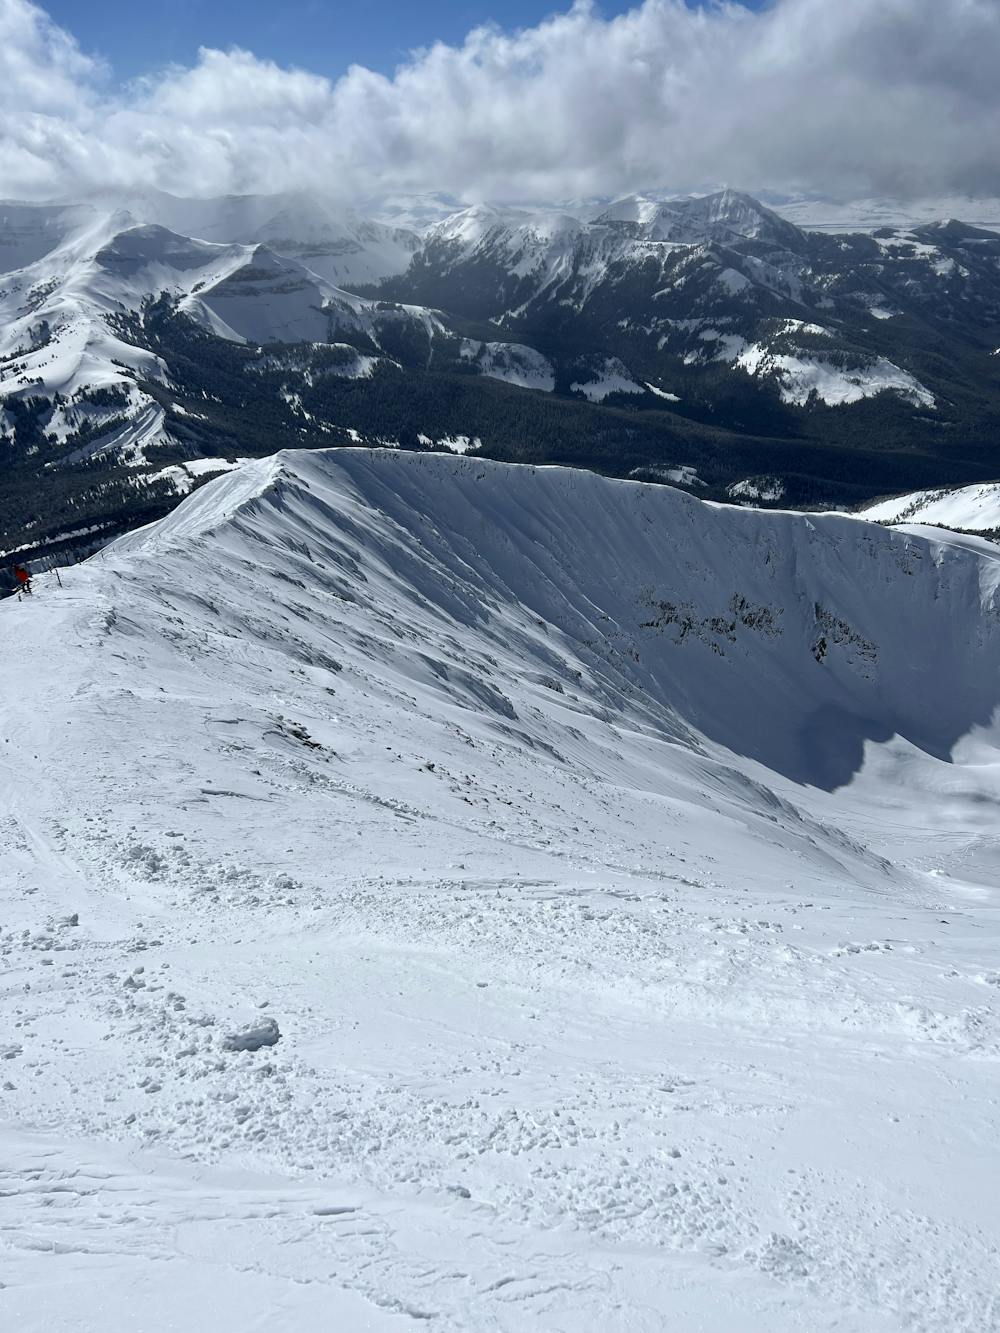 Looking west from the top of Lone Peak. The North summit snowfield is directly behind you when facing this direction. 